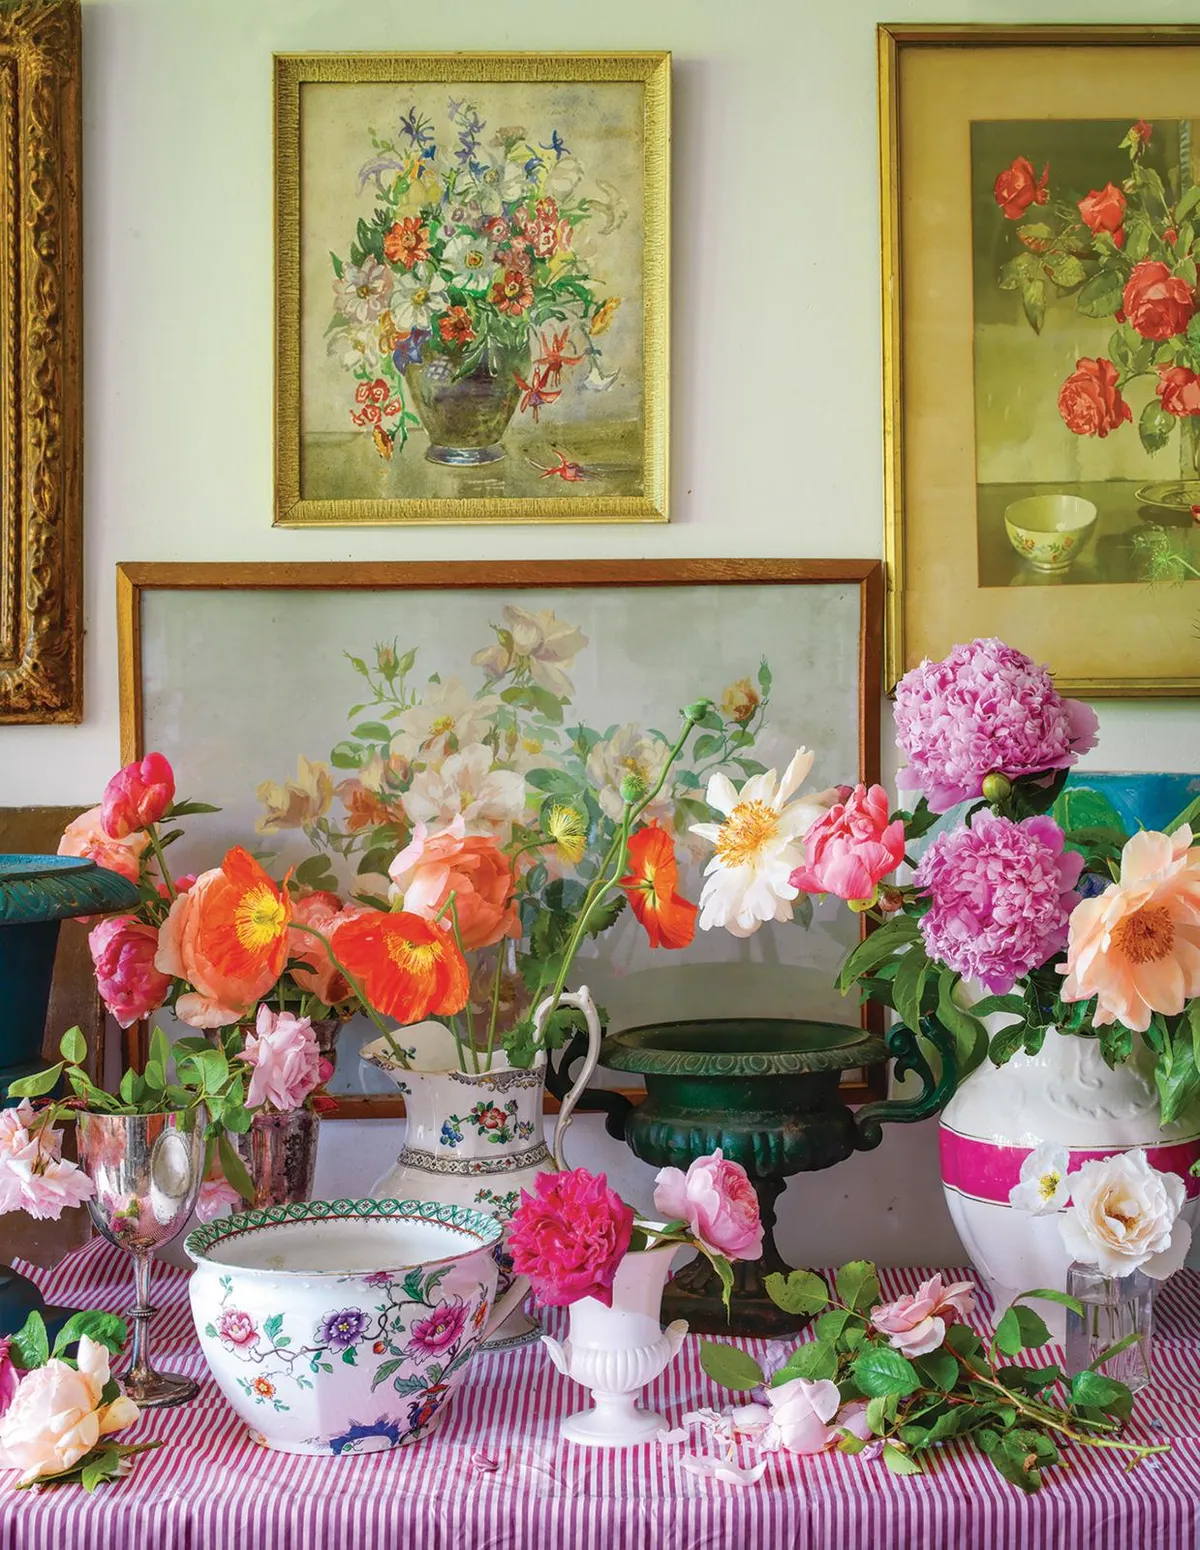 Wardington Manor: Poppies, Roses and Peonies in vases in the cutting room.